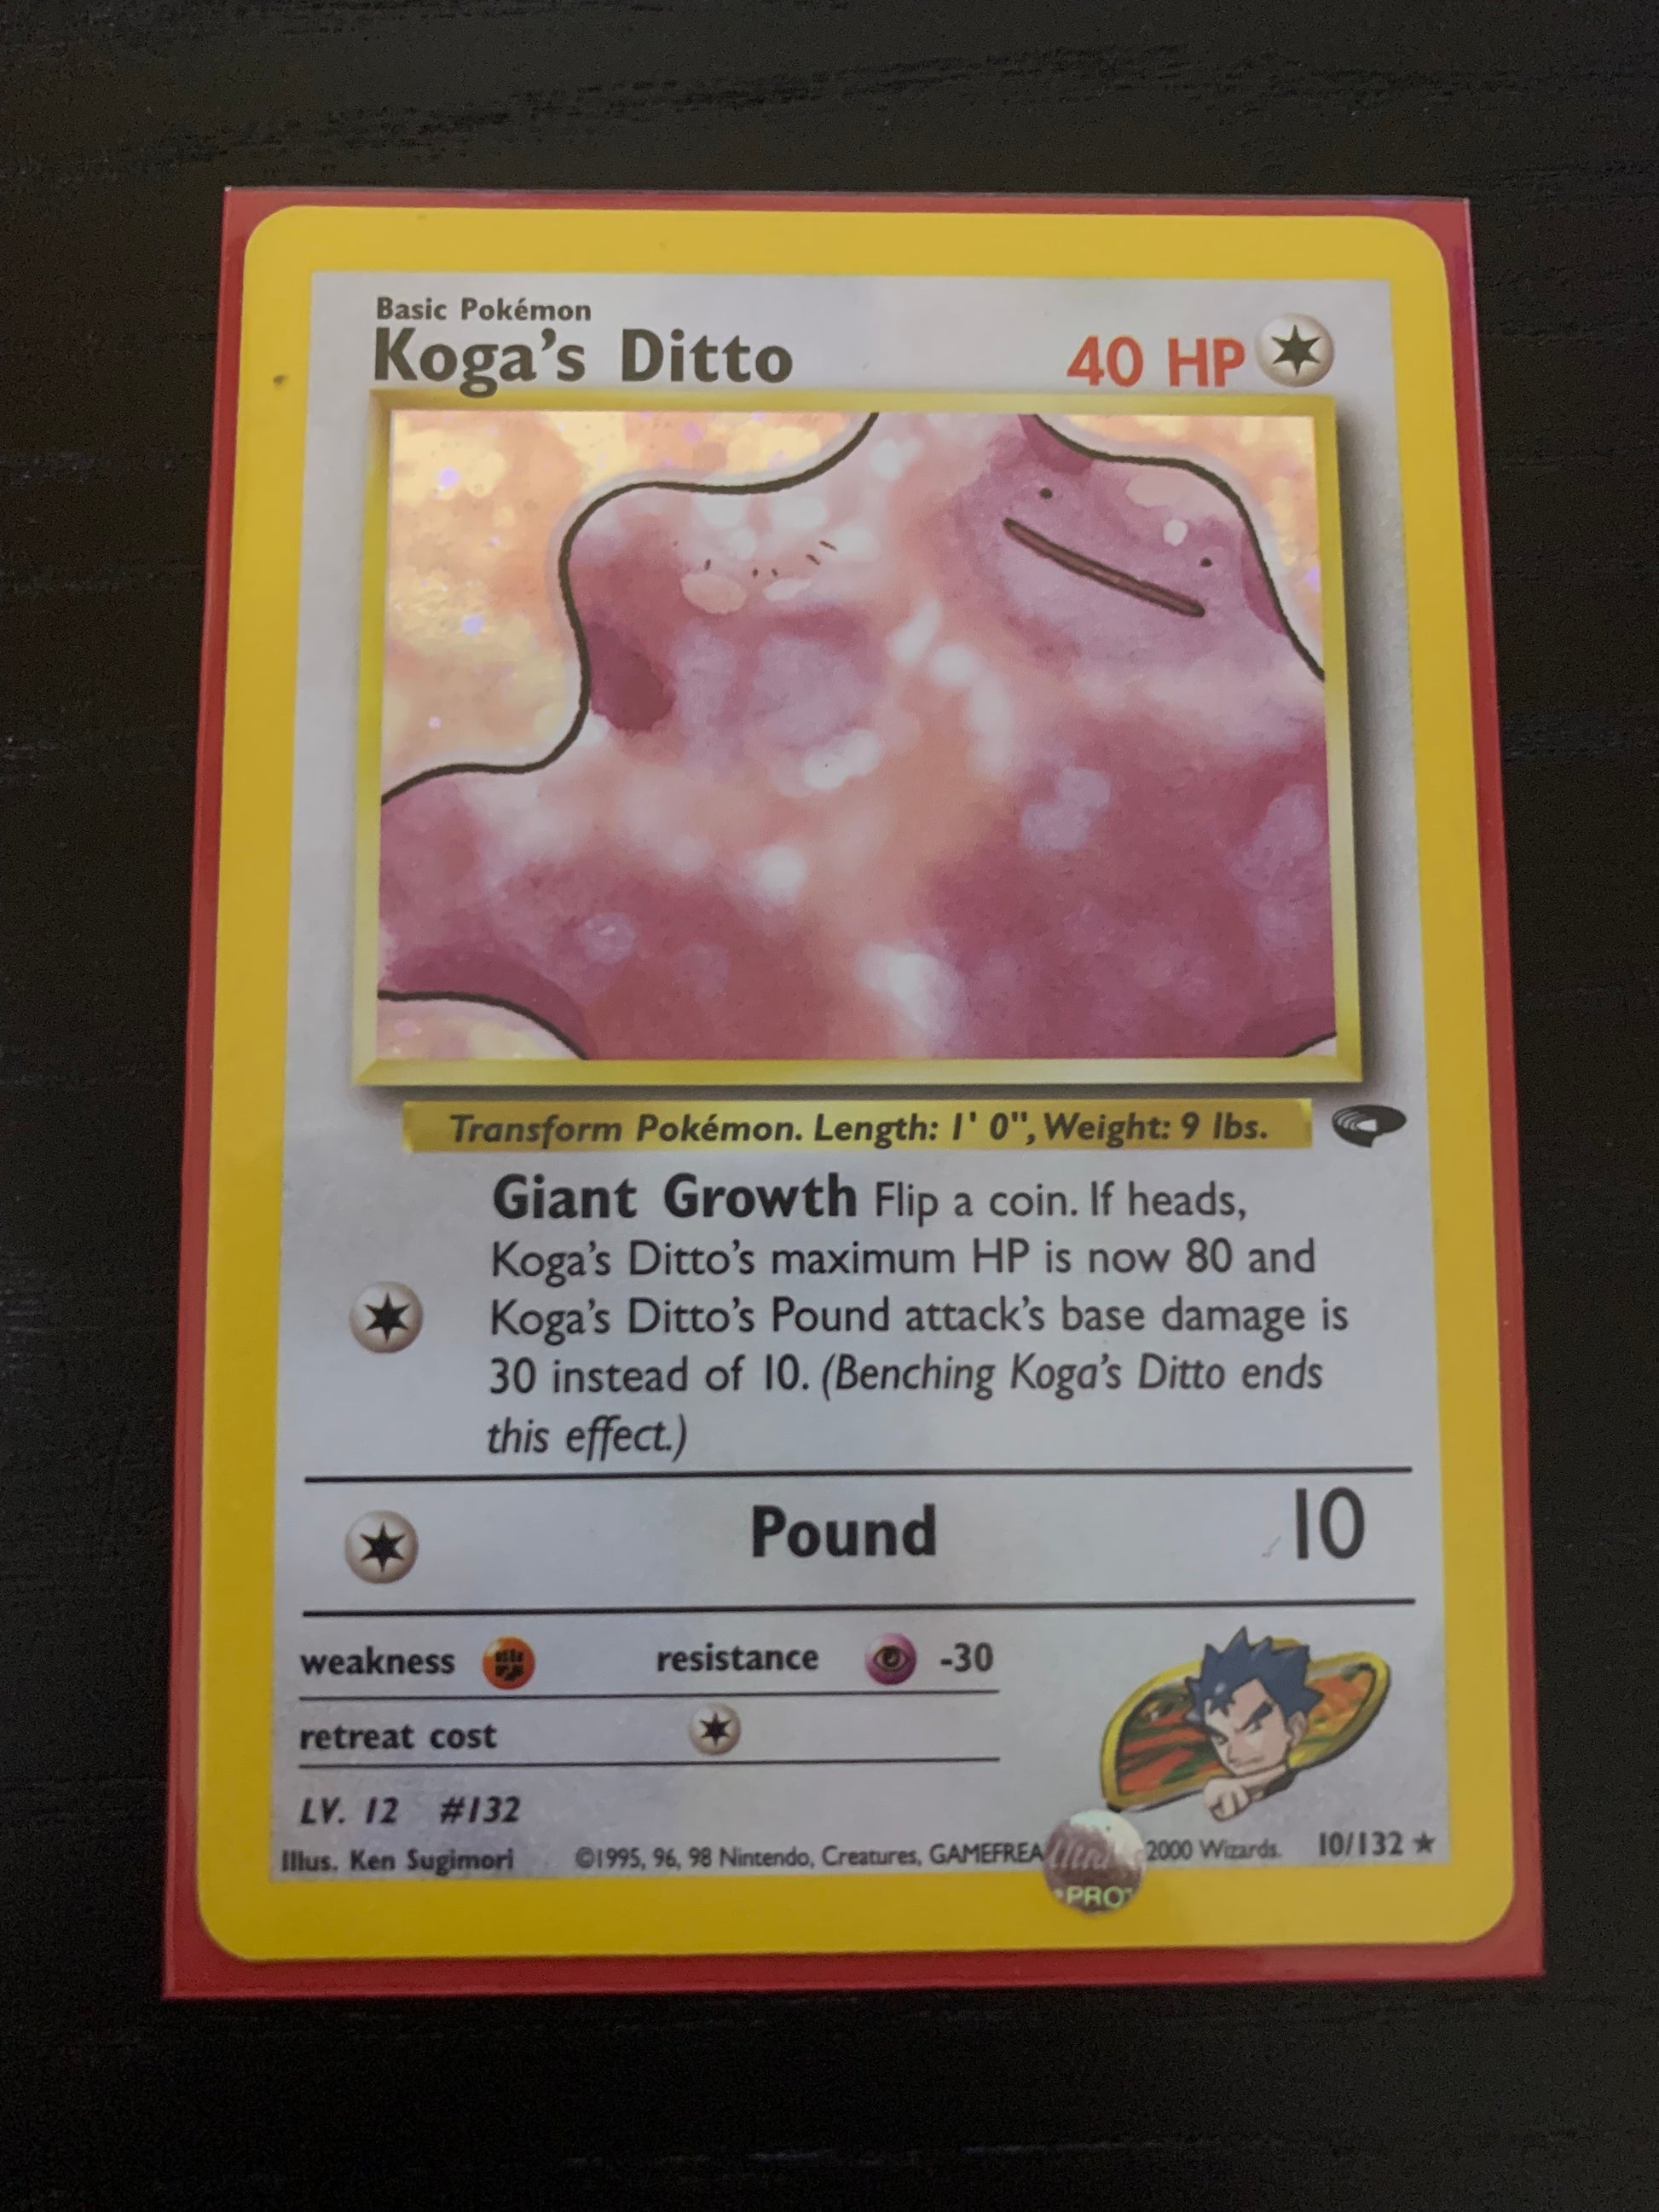 Check the actual price of your Koga's Ditto 10/132 Pokemon card